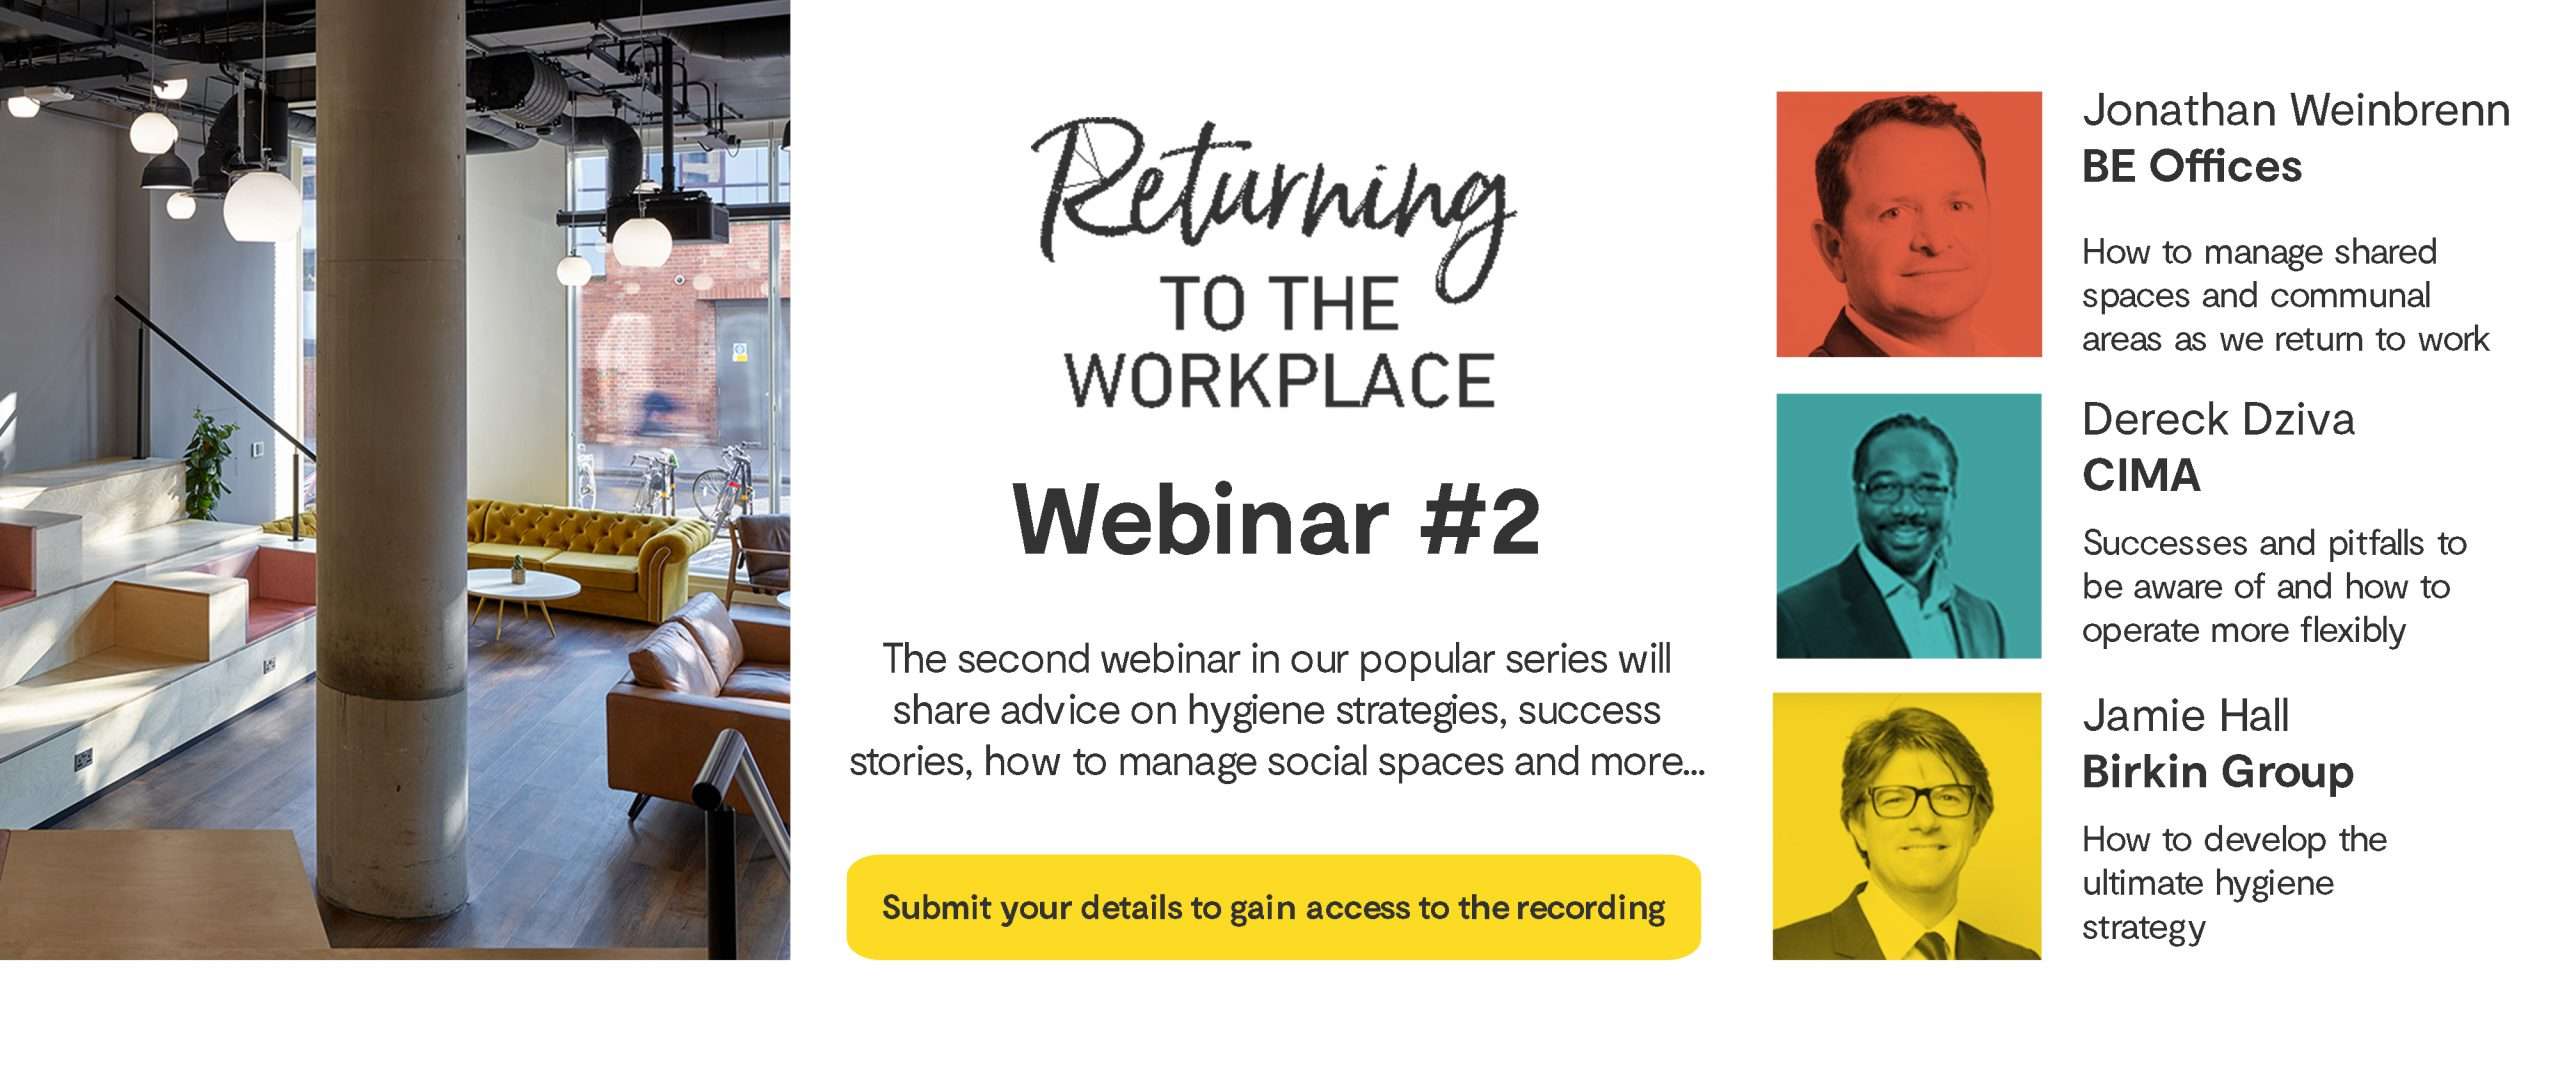 Returning To The Workplace Webinar #2 – 12:30 GMT Friday 1st May 2020